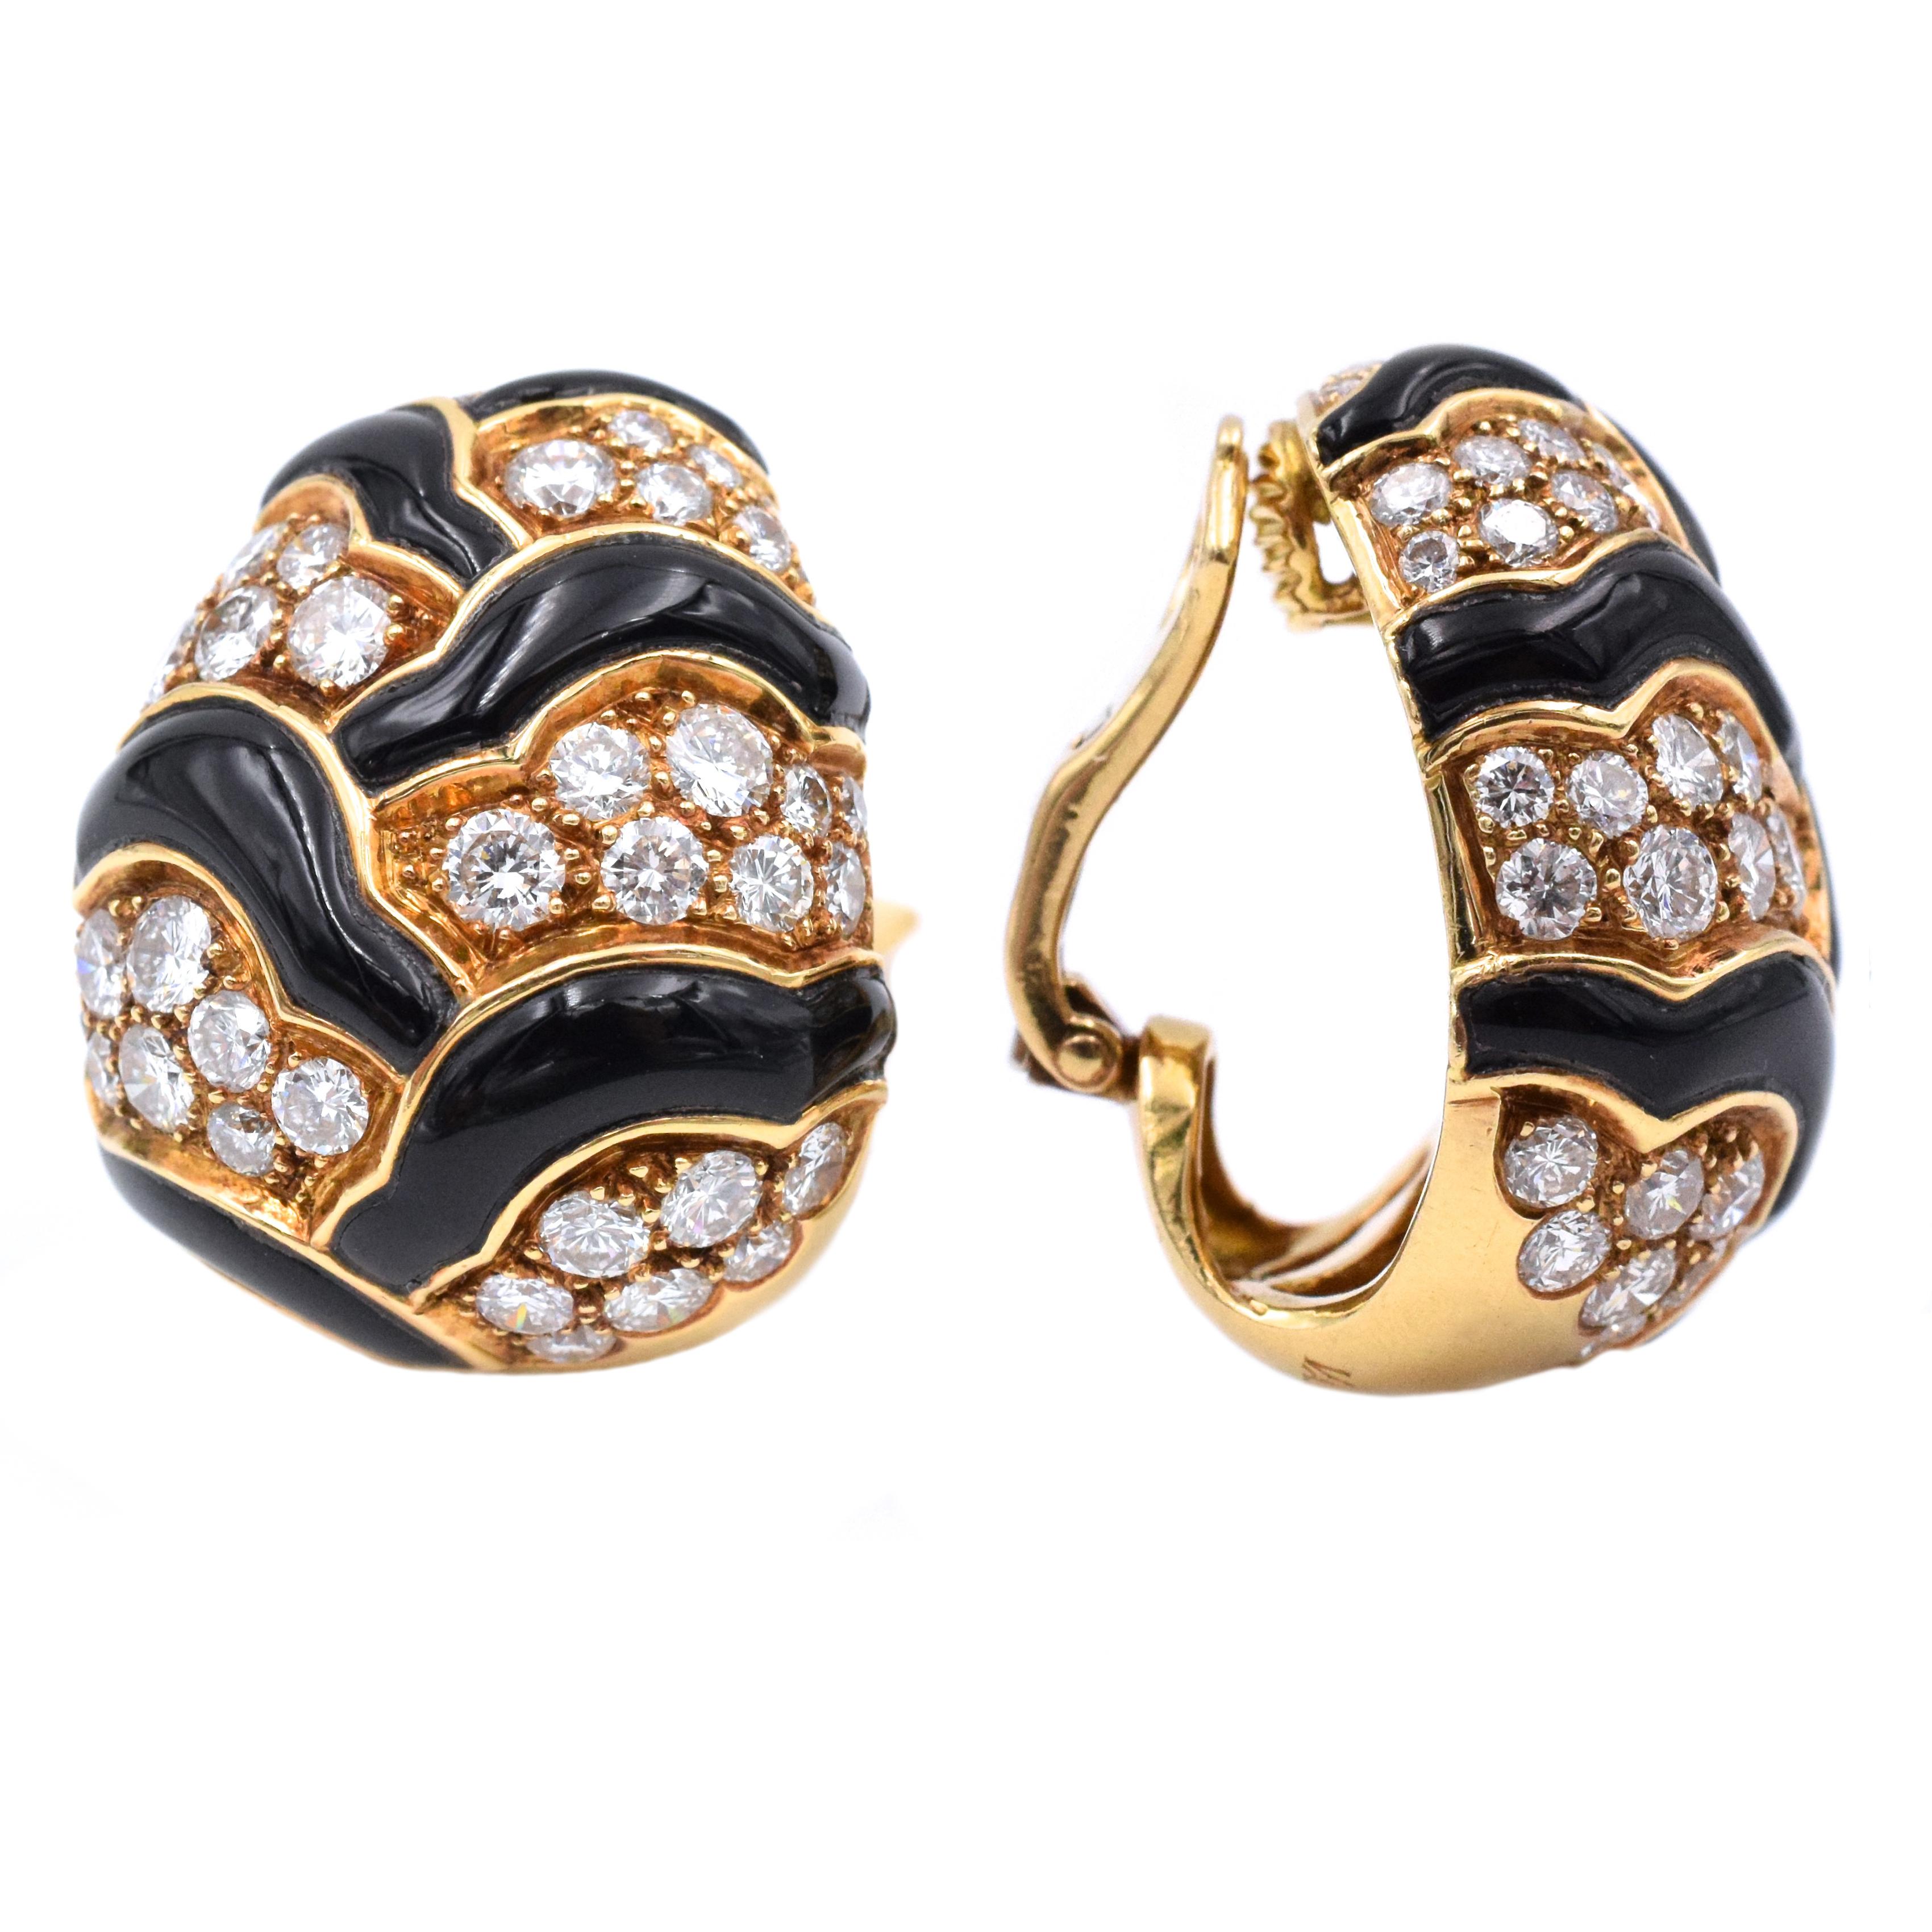 Van Cleef & Arpels Onyx Diamond Gold Earrings In Excellent Condition For Sale In New York, NY